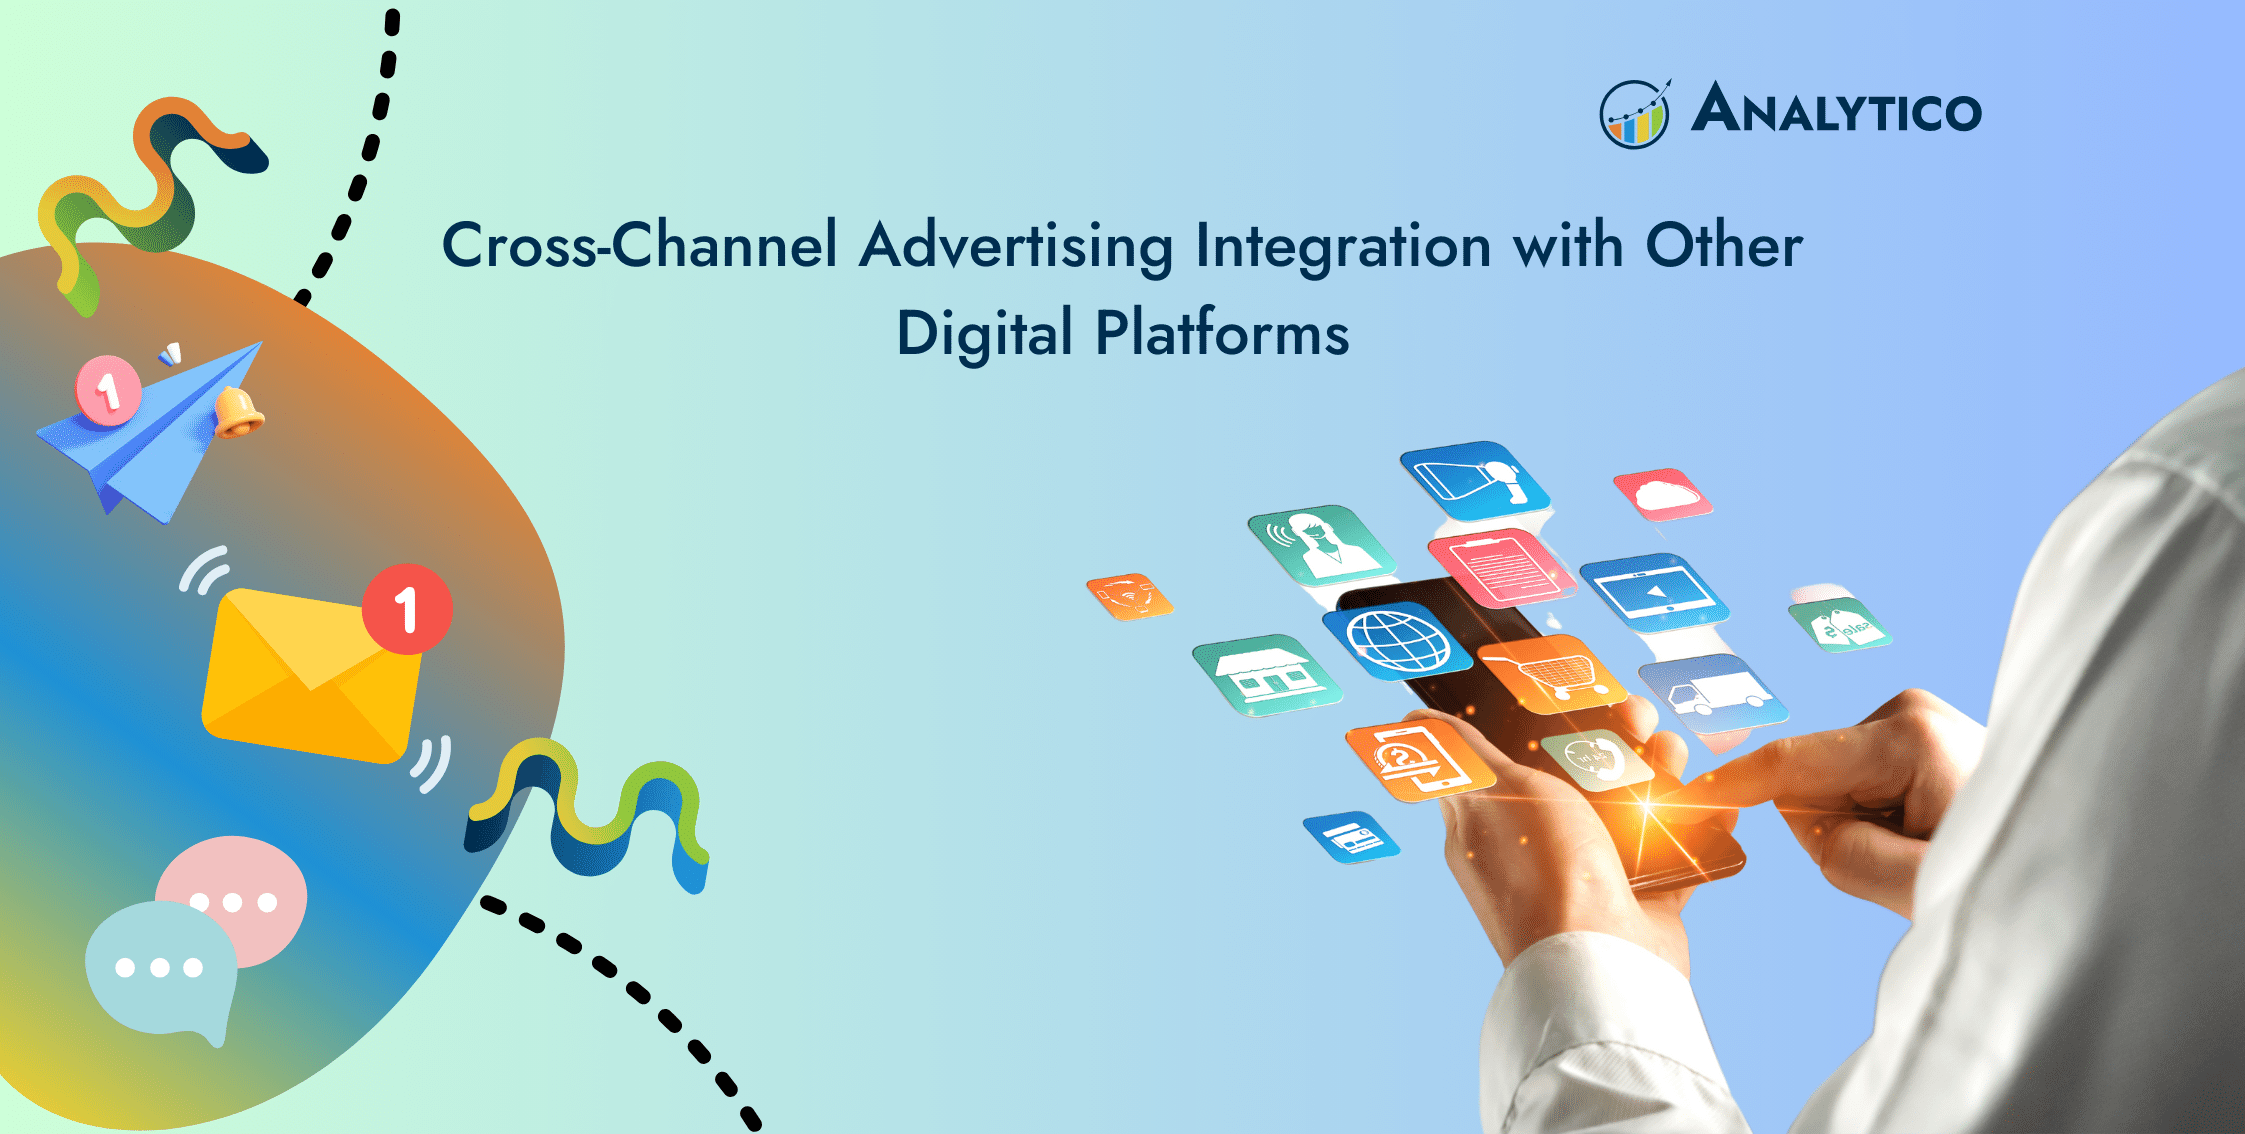 Cross-Channel Advertising Integration with Other Digital Platforms